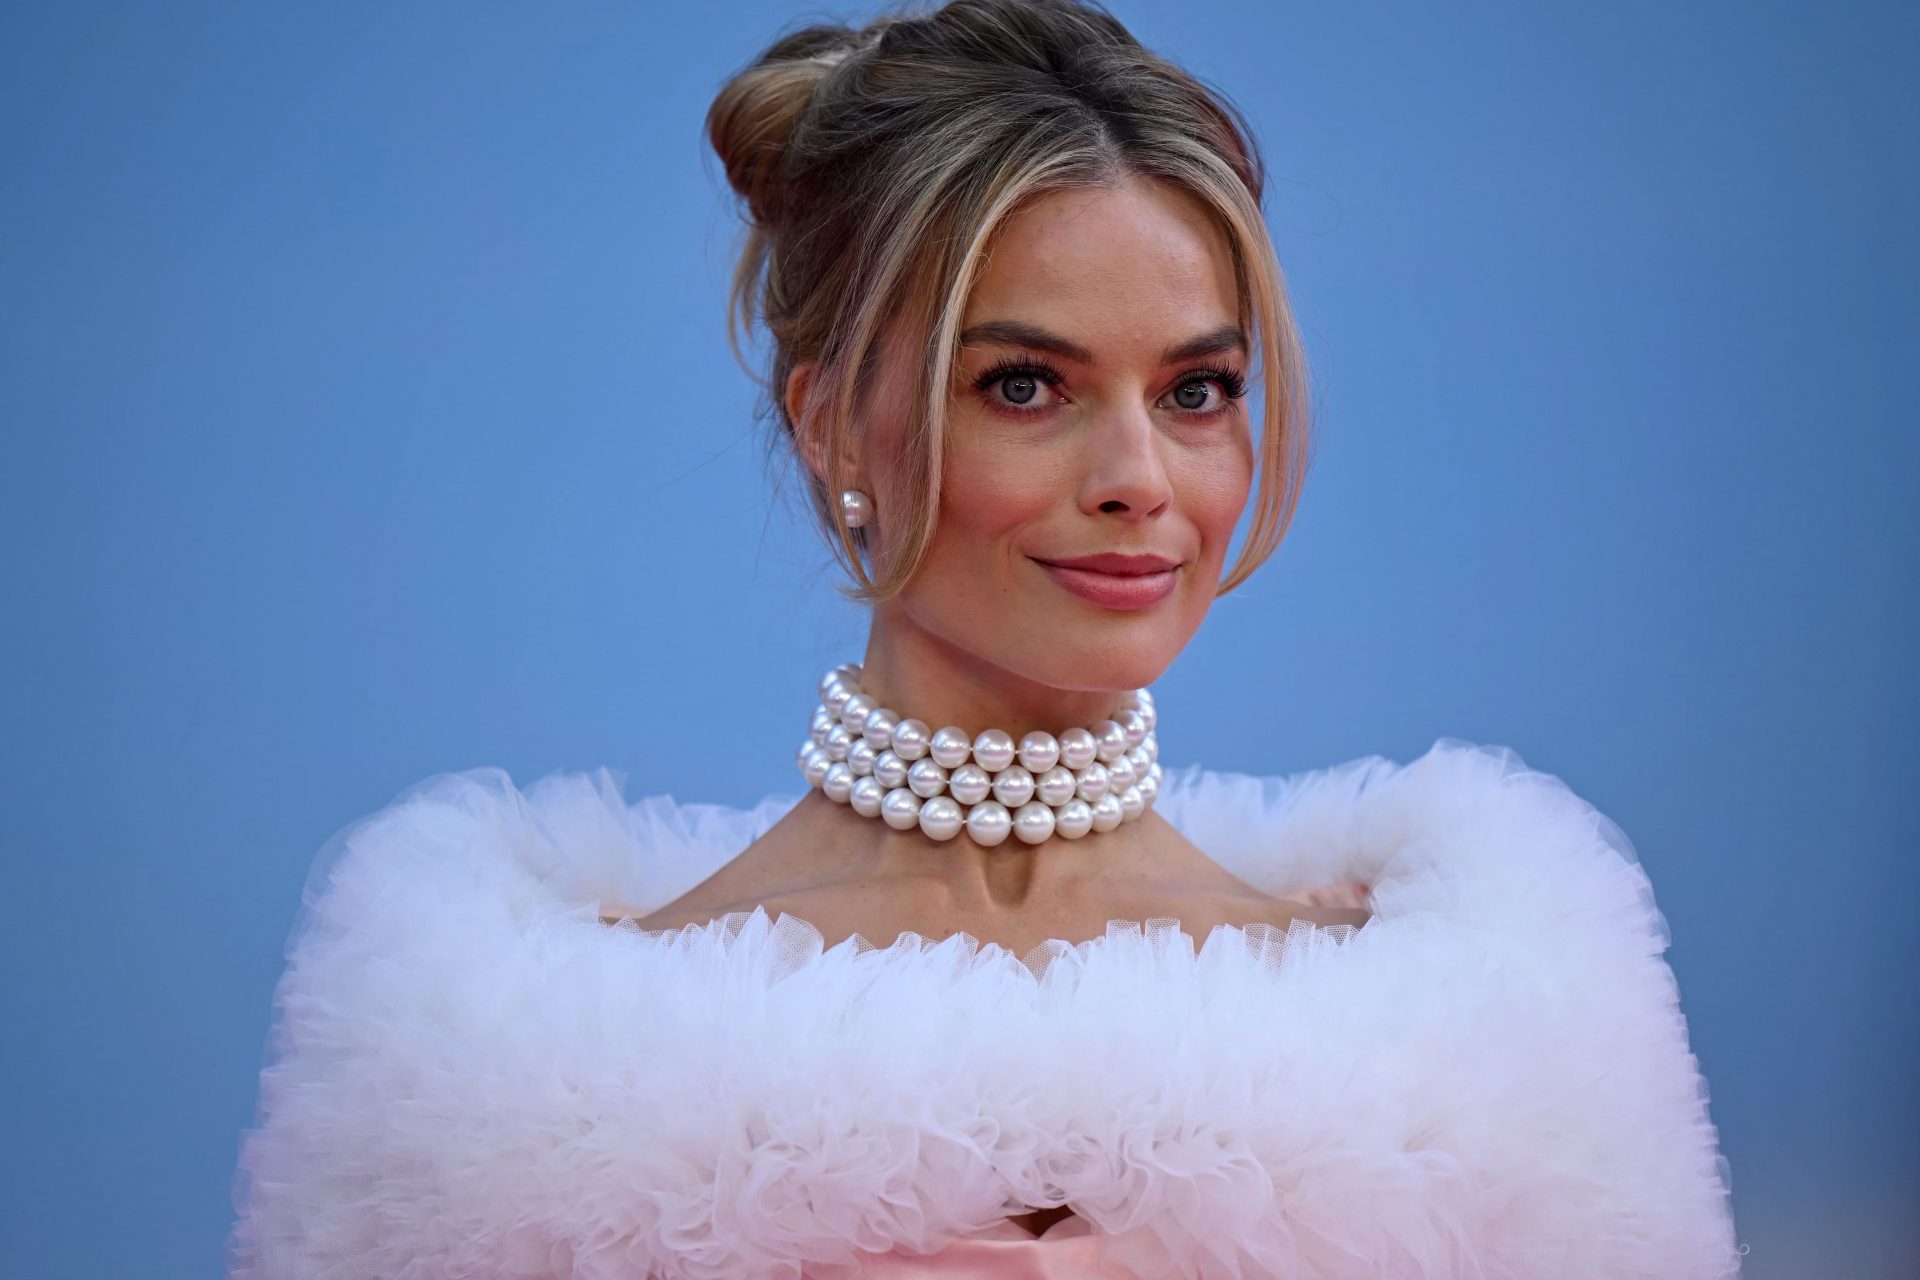 Margot Robbie's standout looks at the 'Barbie' premieres